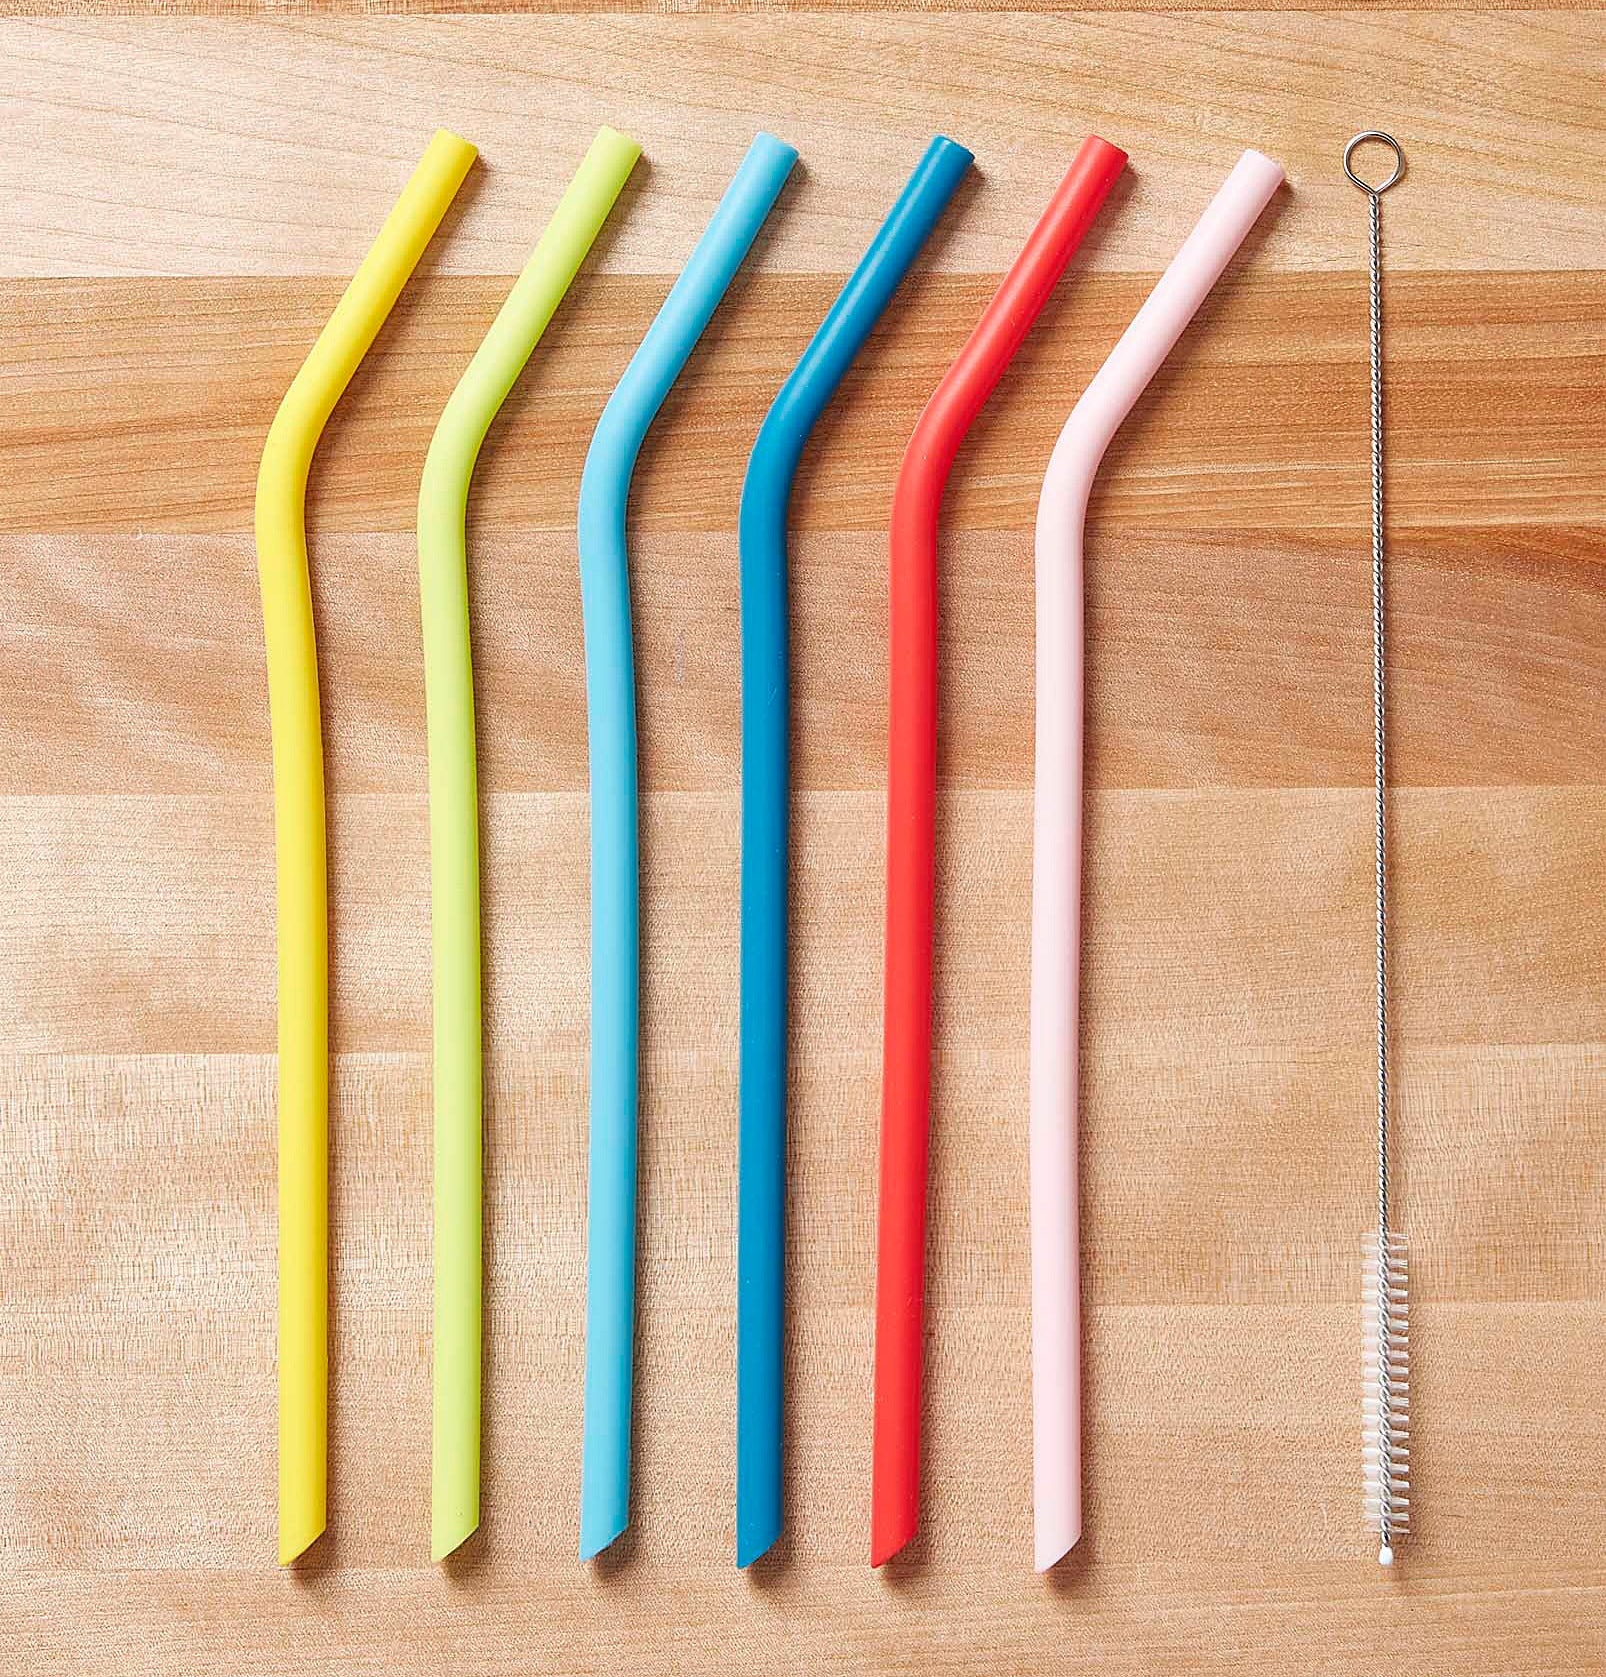 The straws and cleaning brush on a wooden table